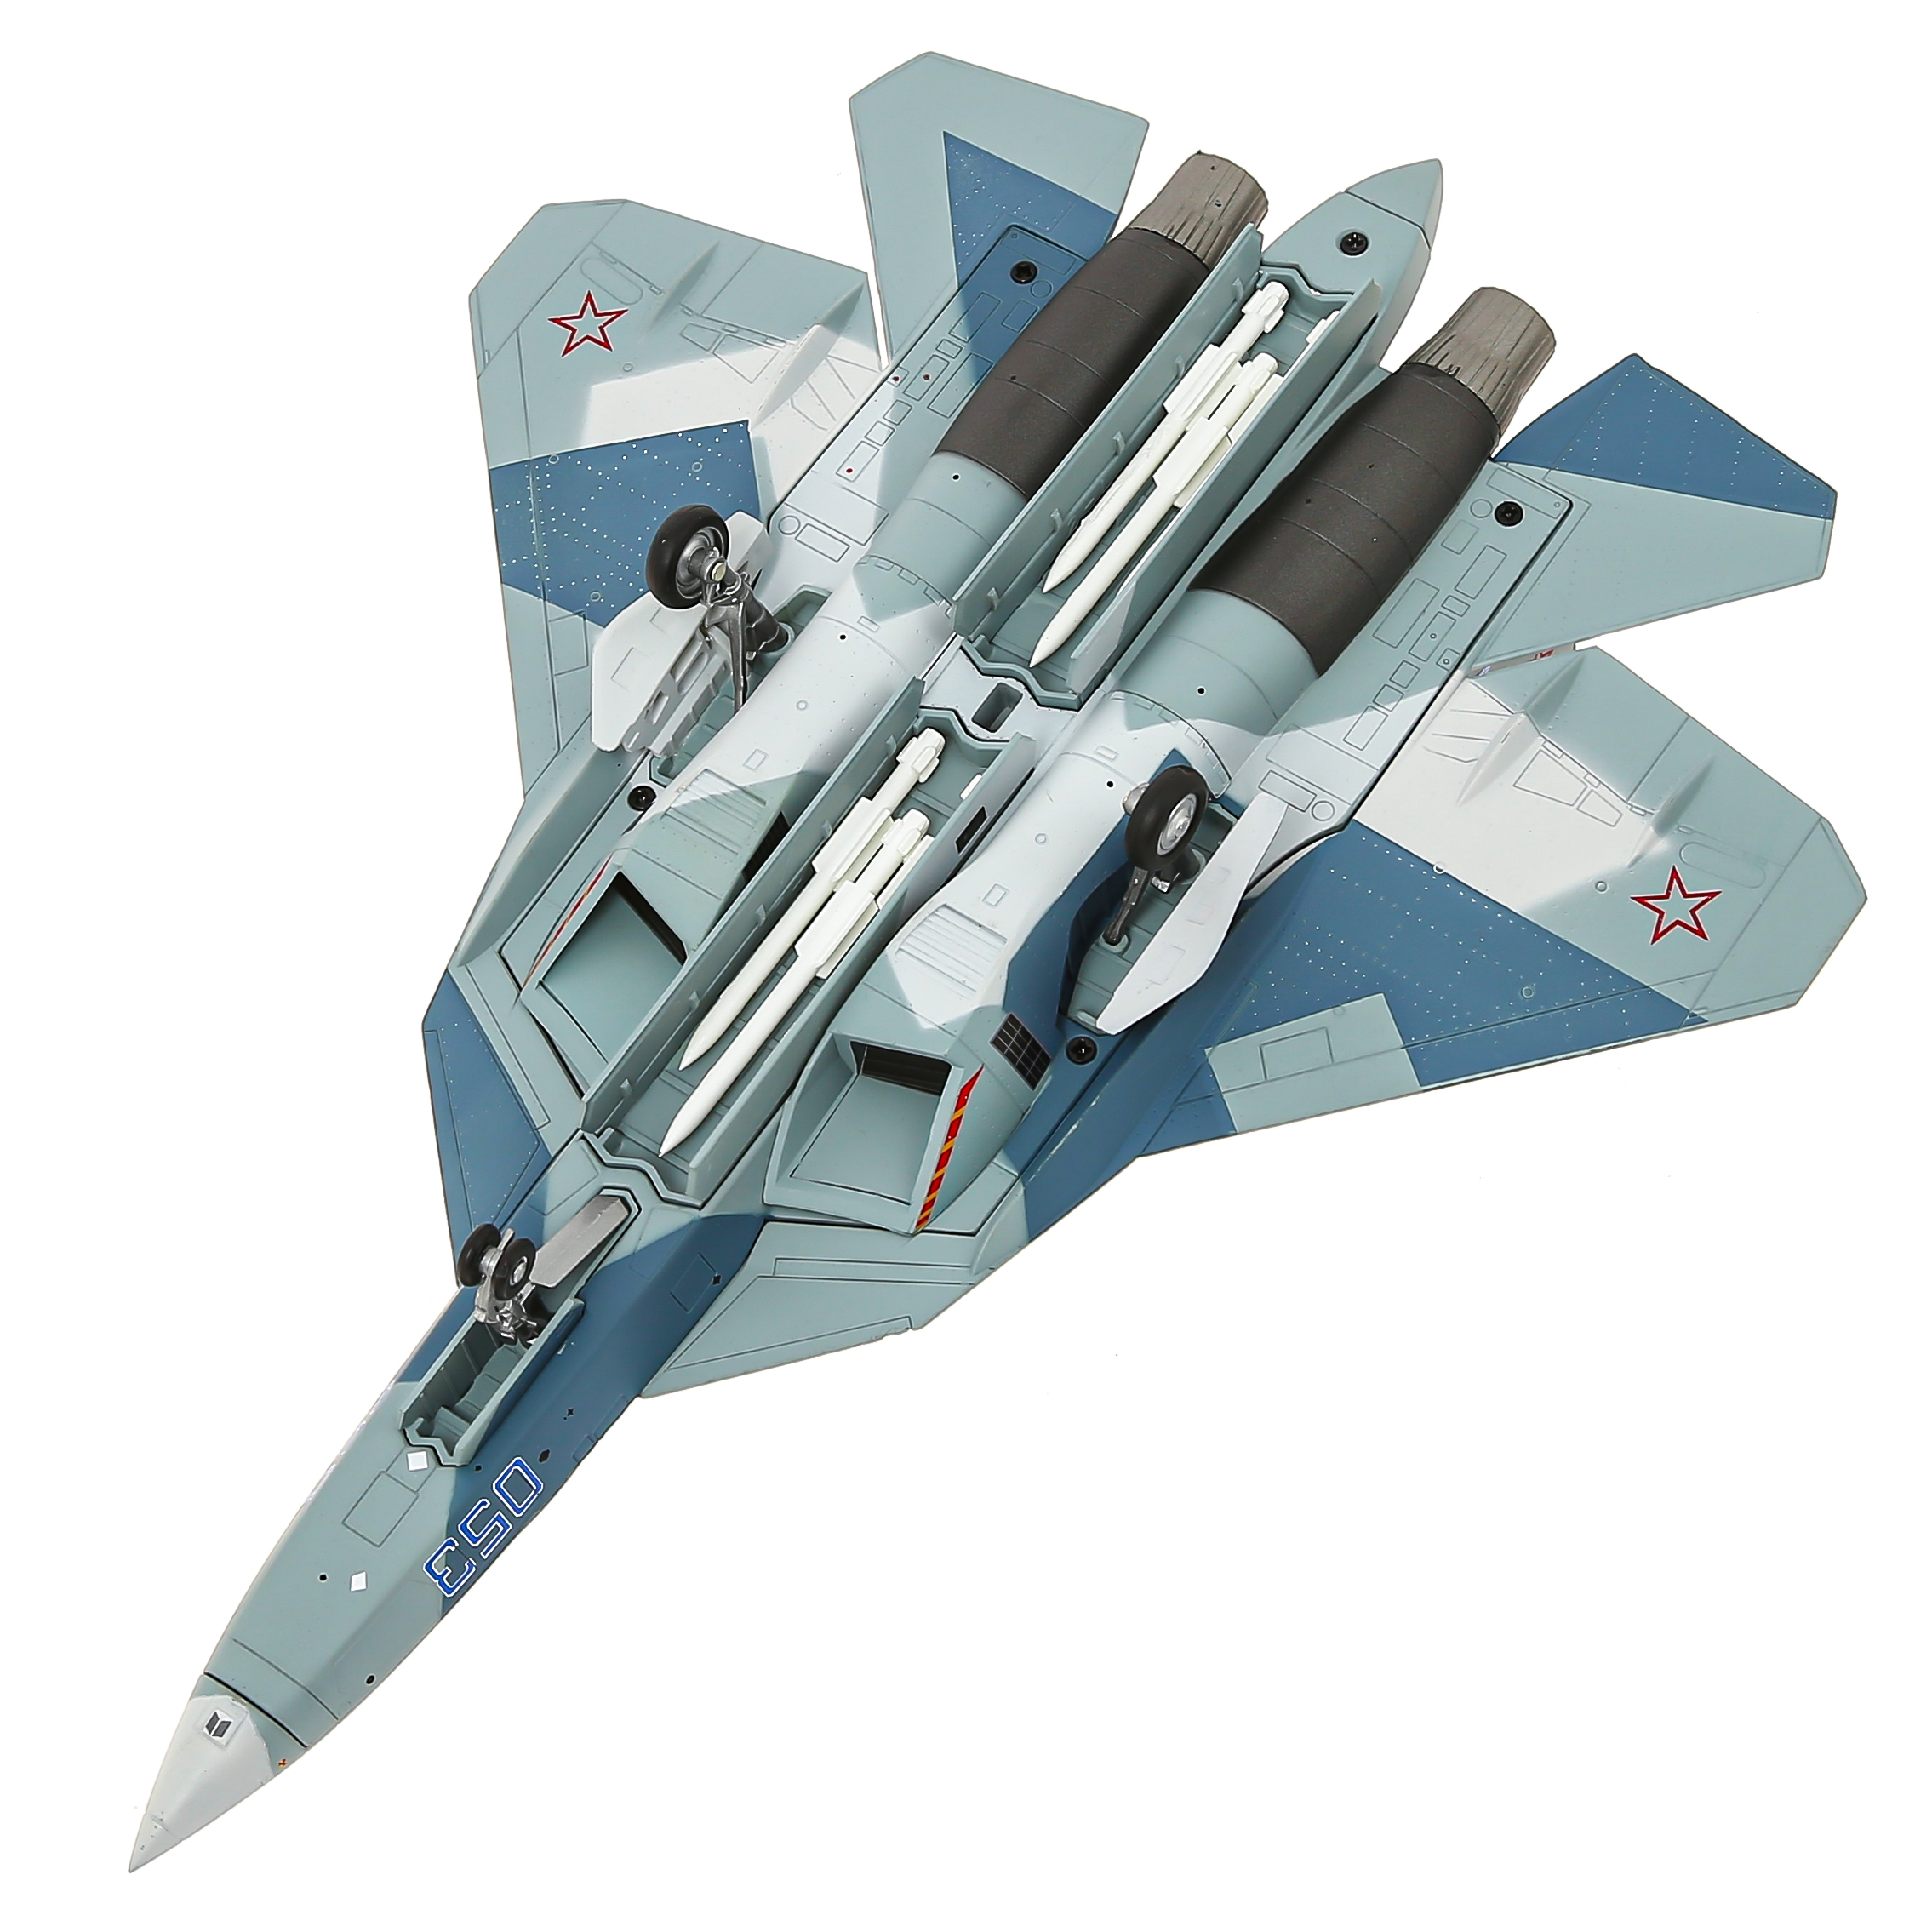       -57 (-50), ,  1:72.  28 . Model of the fifth-generation fighter aircraft of Russia Su-57 (T-50), metal, scale 1:72. Length 28 cm. # 5 hobbyplus.ru